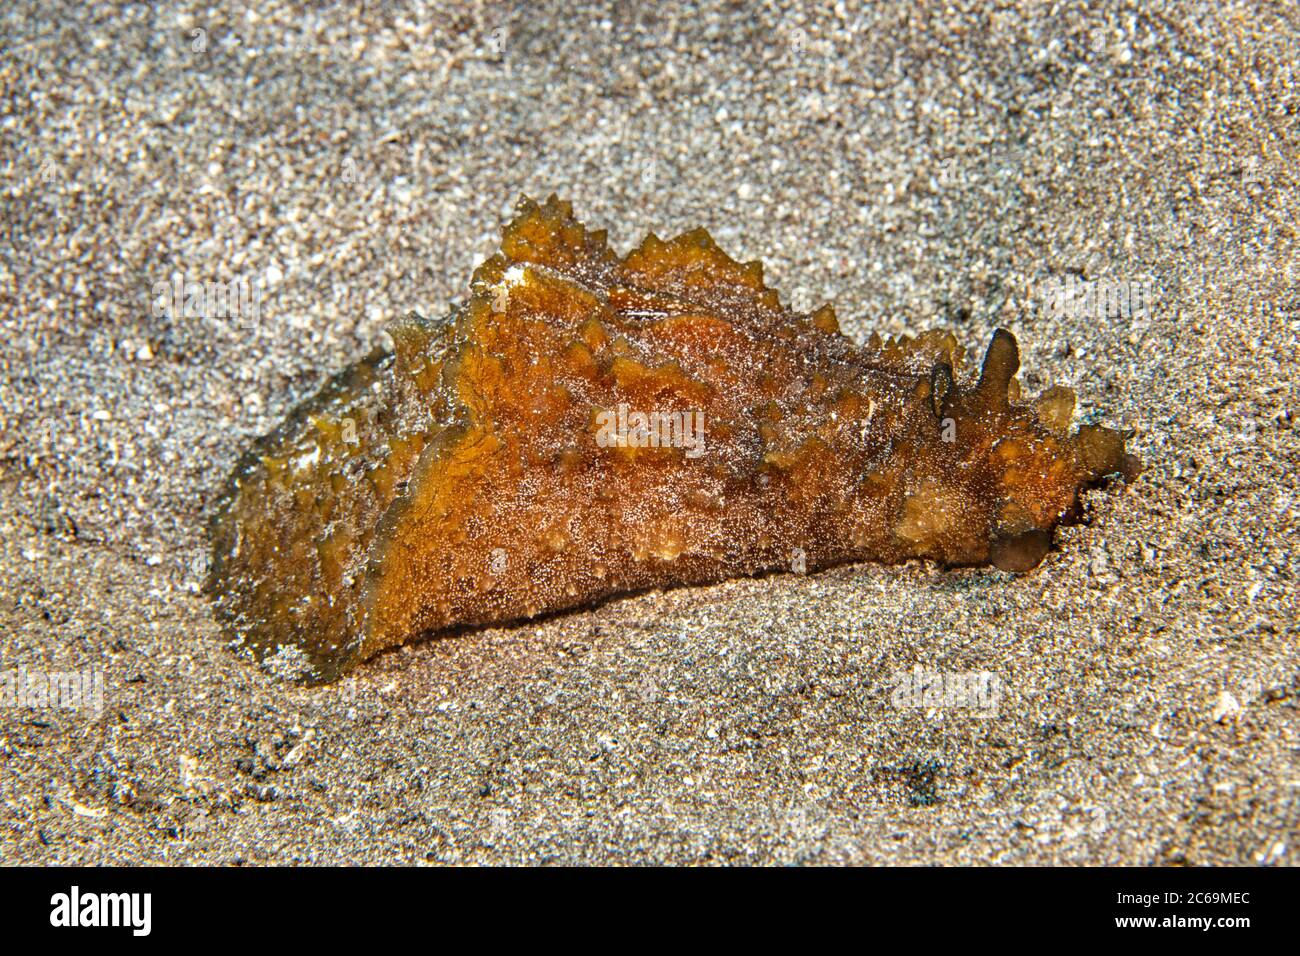 The Eared Sea Hare, Dolabella auricularia, can reach 10 inches and can be found in tide pools on down past 70 feet, Hawaii. Stock Photo